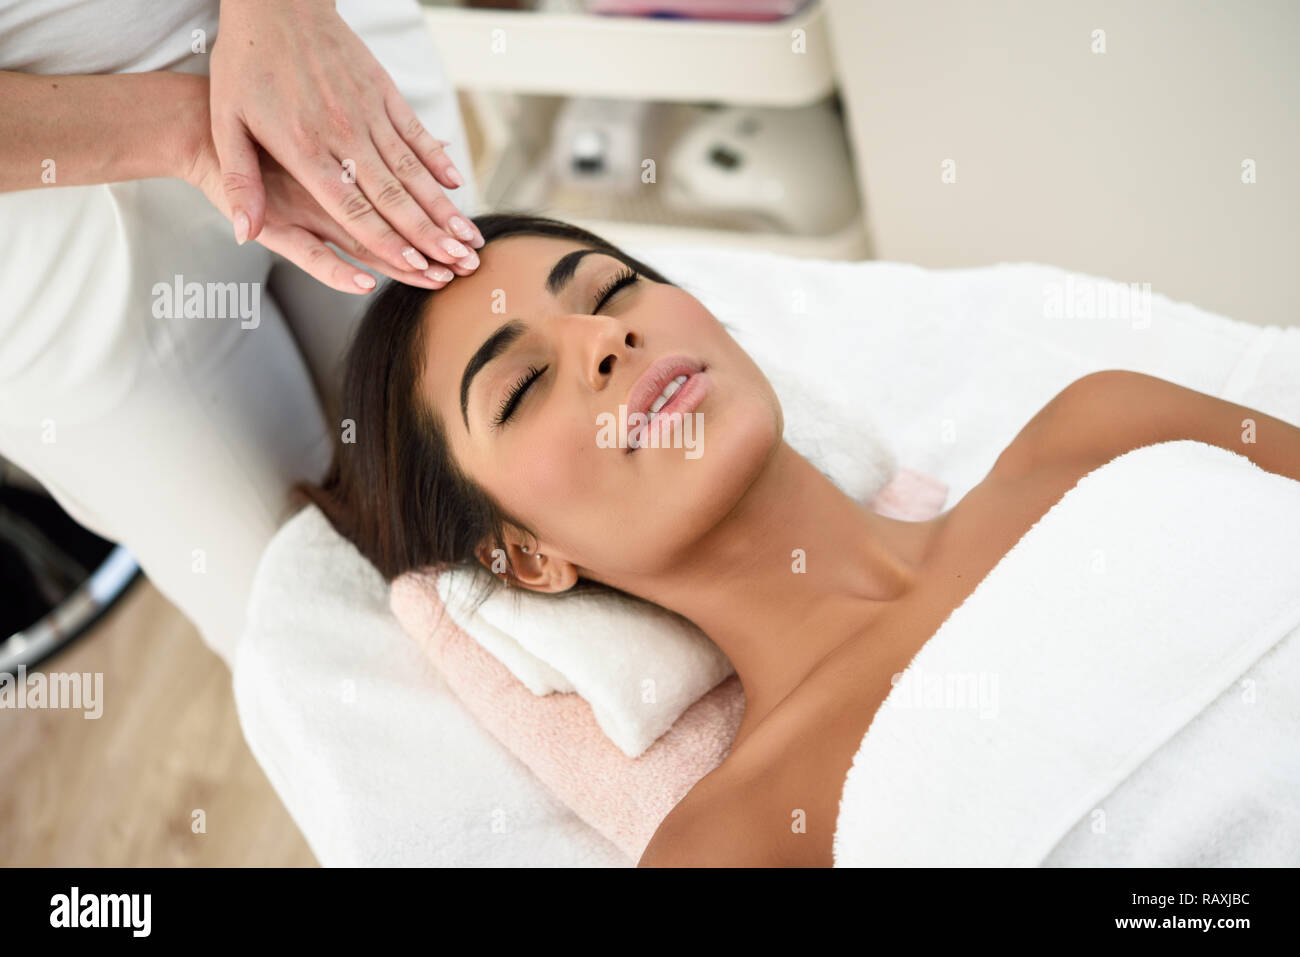 Arab woman receiving head massage in spa wellness center. Beauty and Aesthetic concepts. Stock Photo